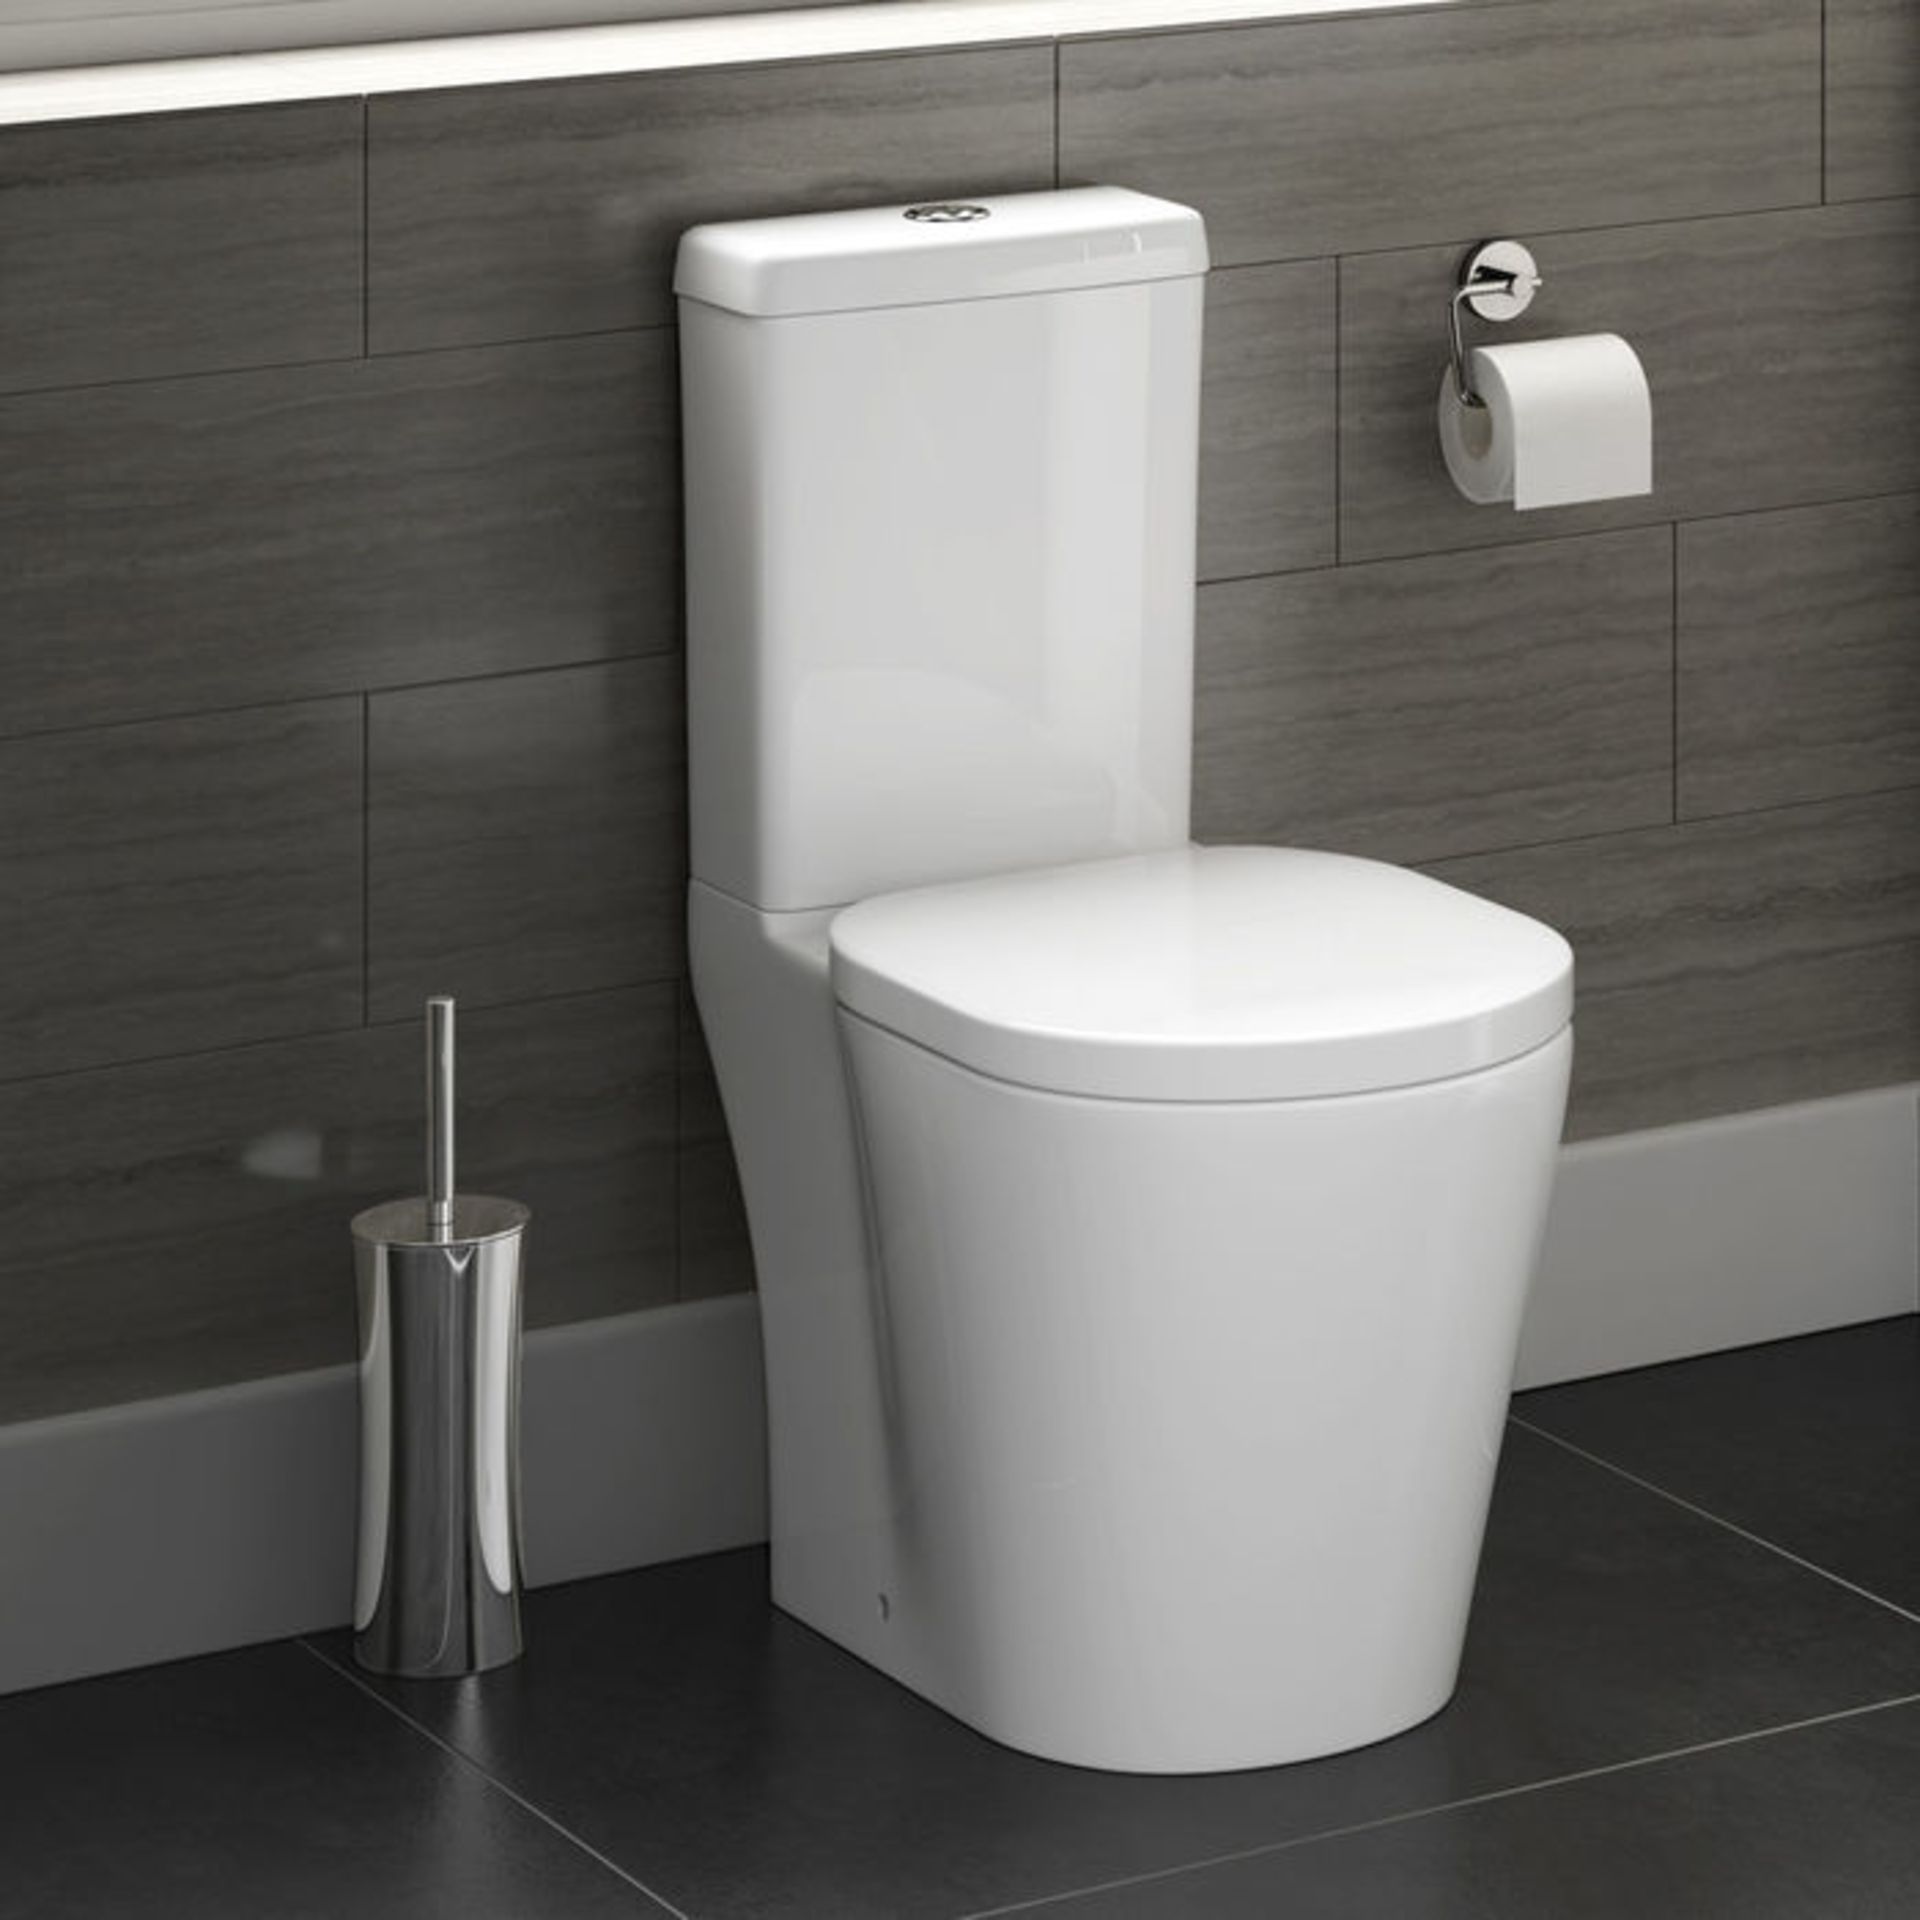 (G14) Albi Close Coupled Toilet & Cistern inc Soft Close Seat RRP £349.99 This innovative toilet